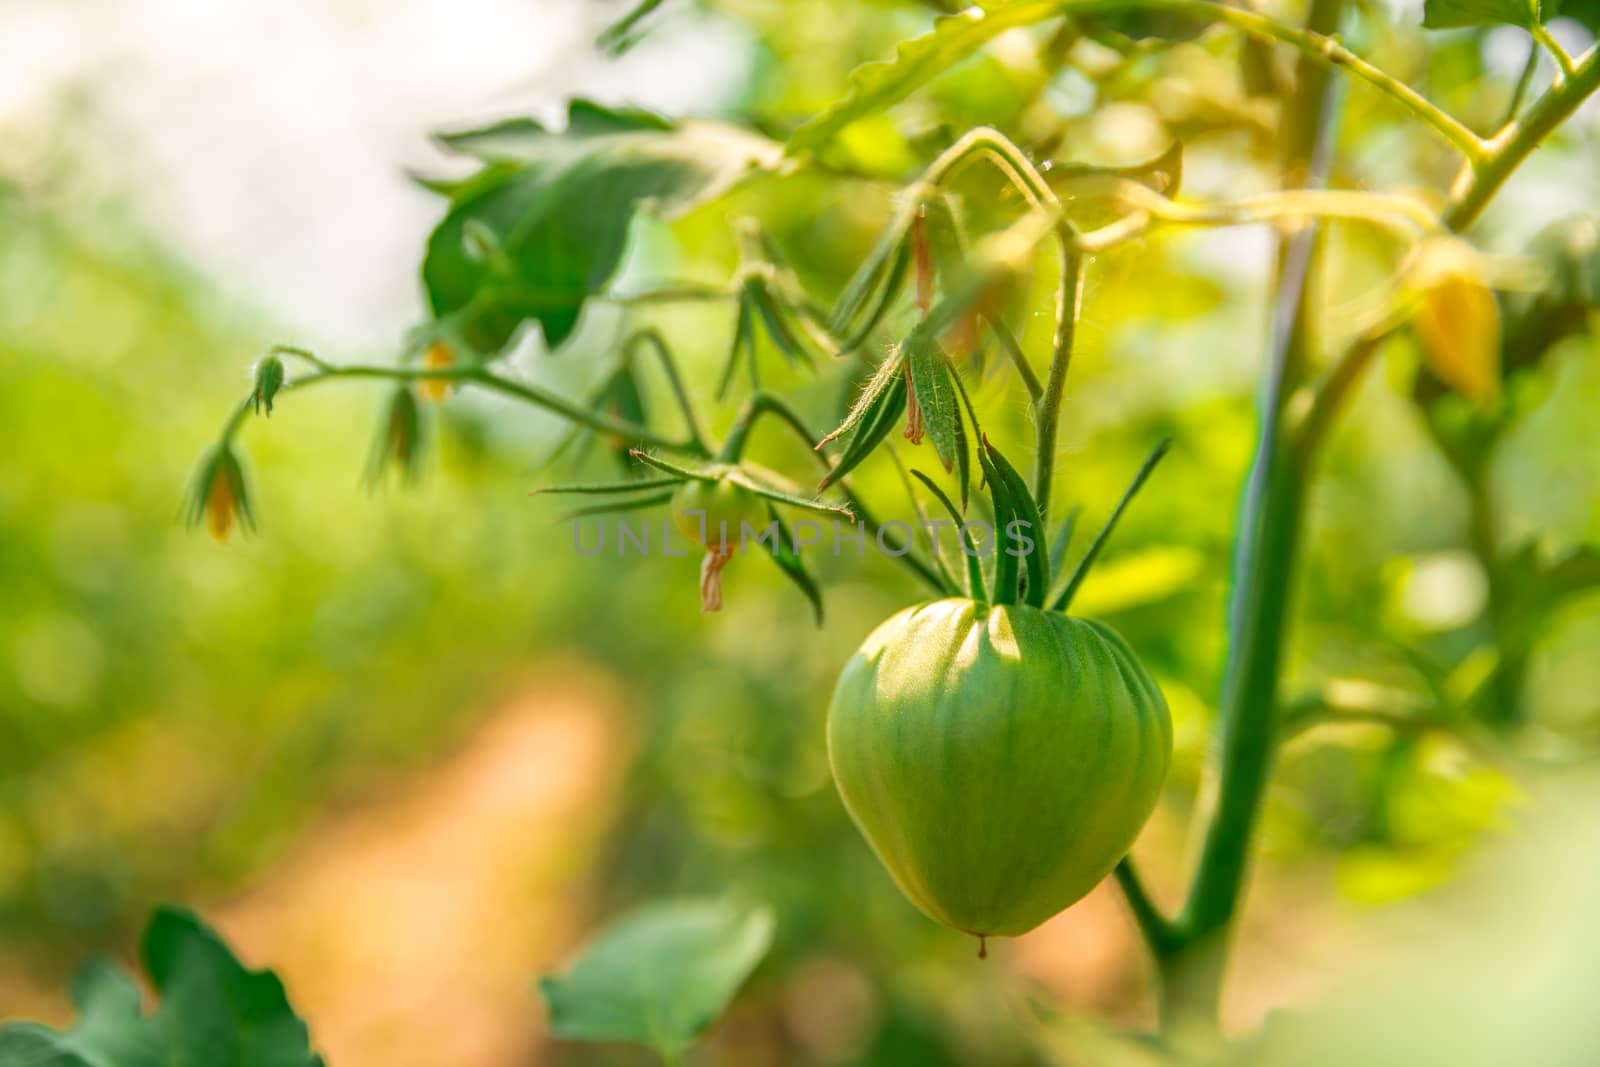 ripening green tomatoes in a greenhouse on an organic farm. healthy vegetables full of vitamins by Edophoto